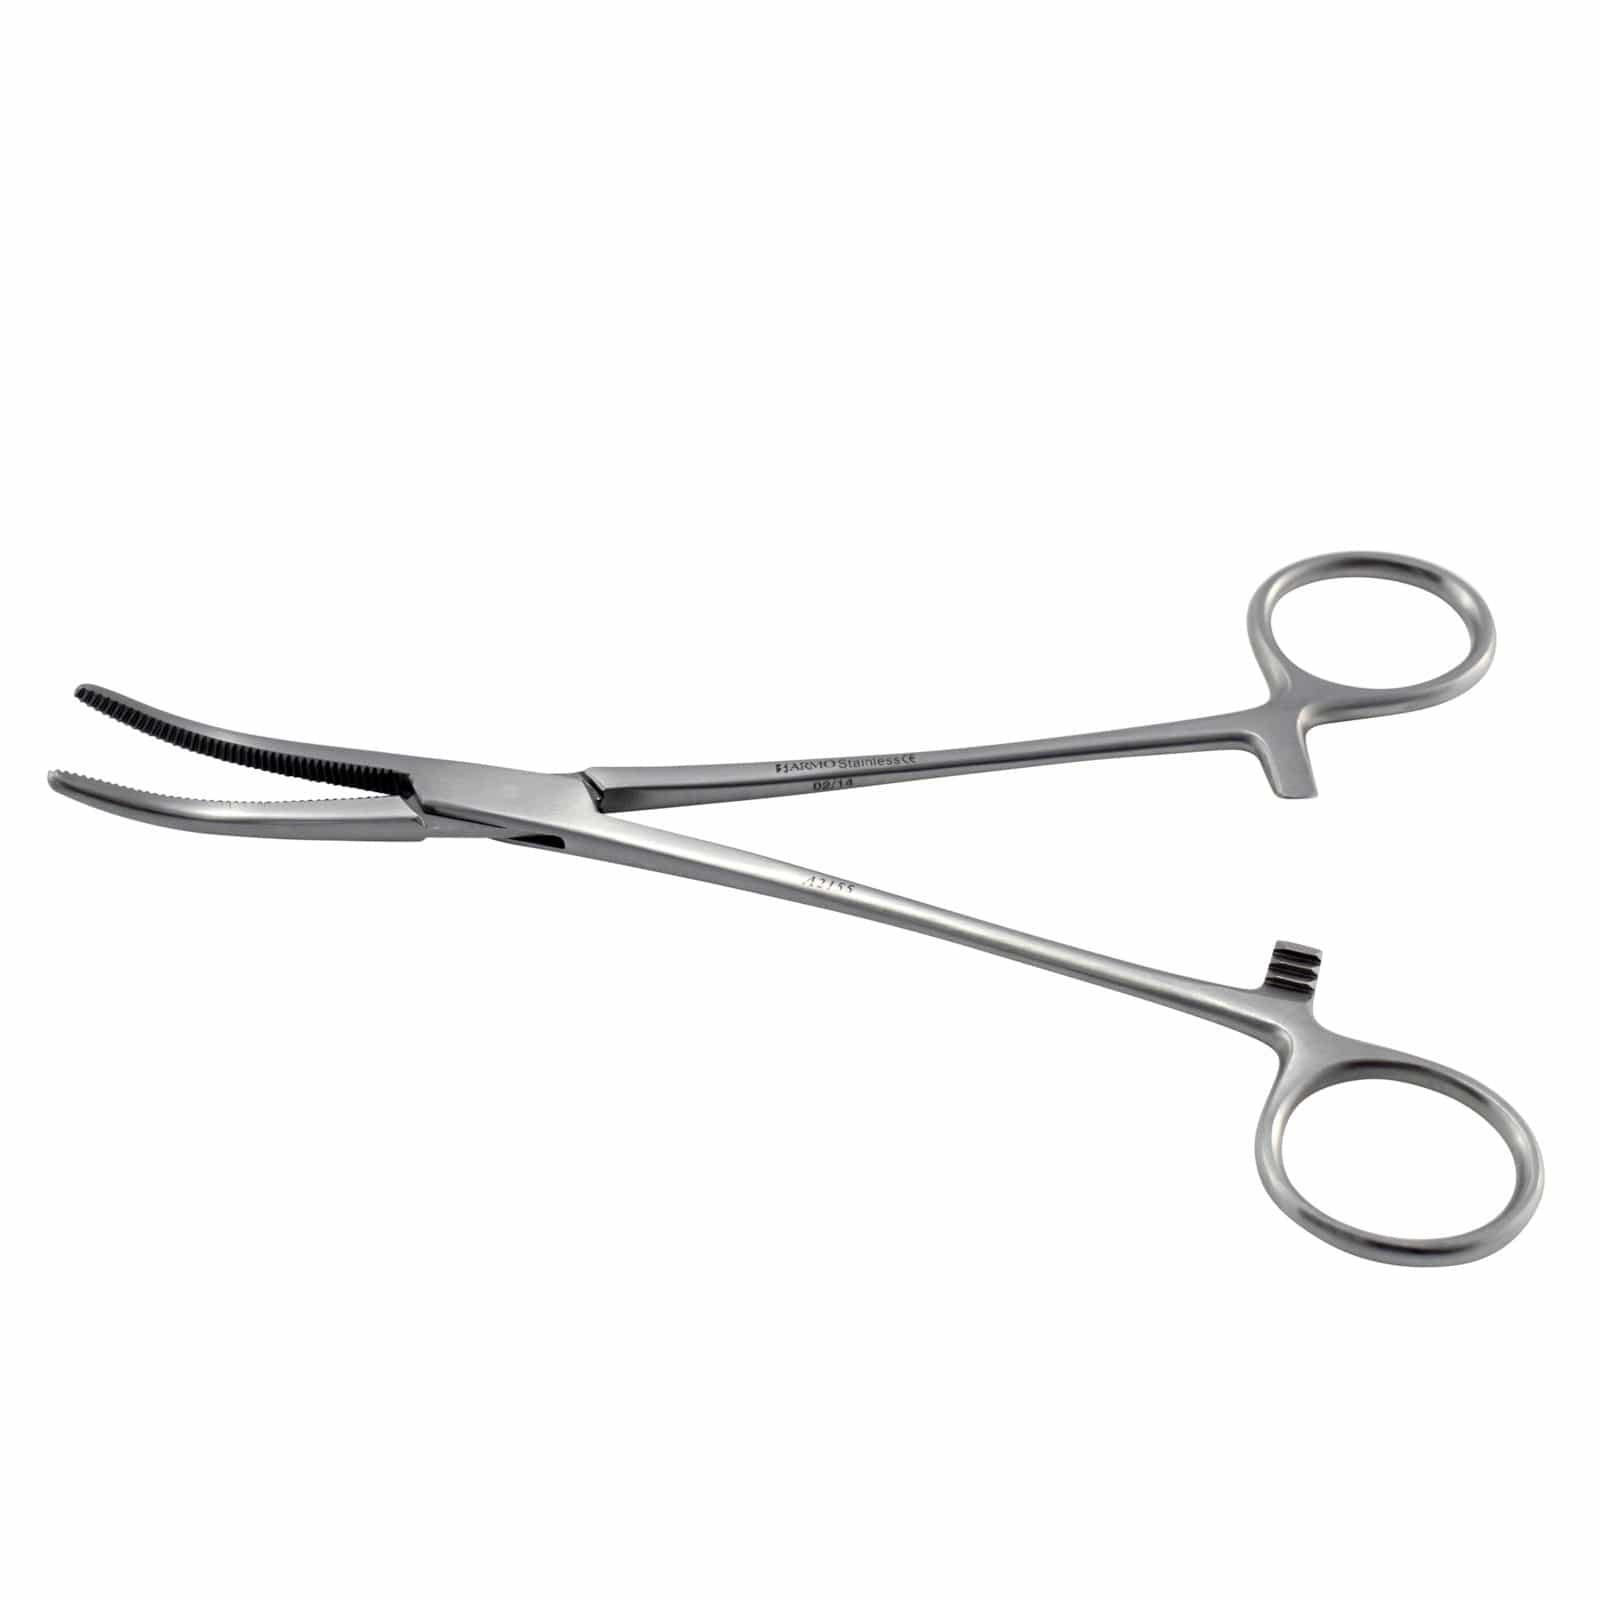 Armo Surgical Instruments 18cm / Curved Armo Spencer Wells Artery Forceps